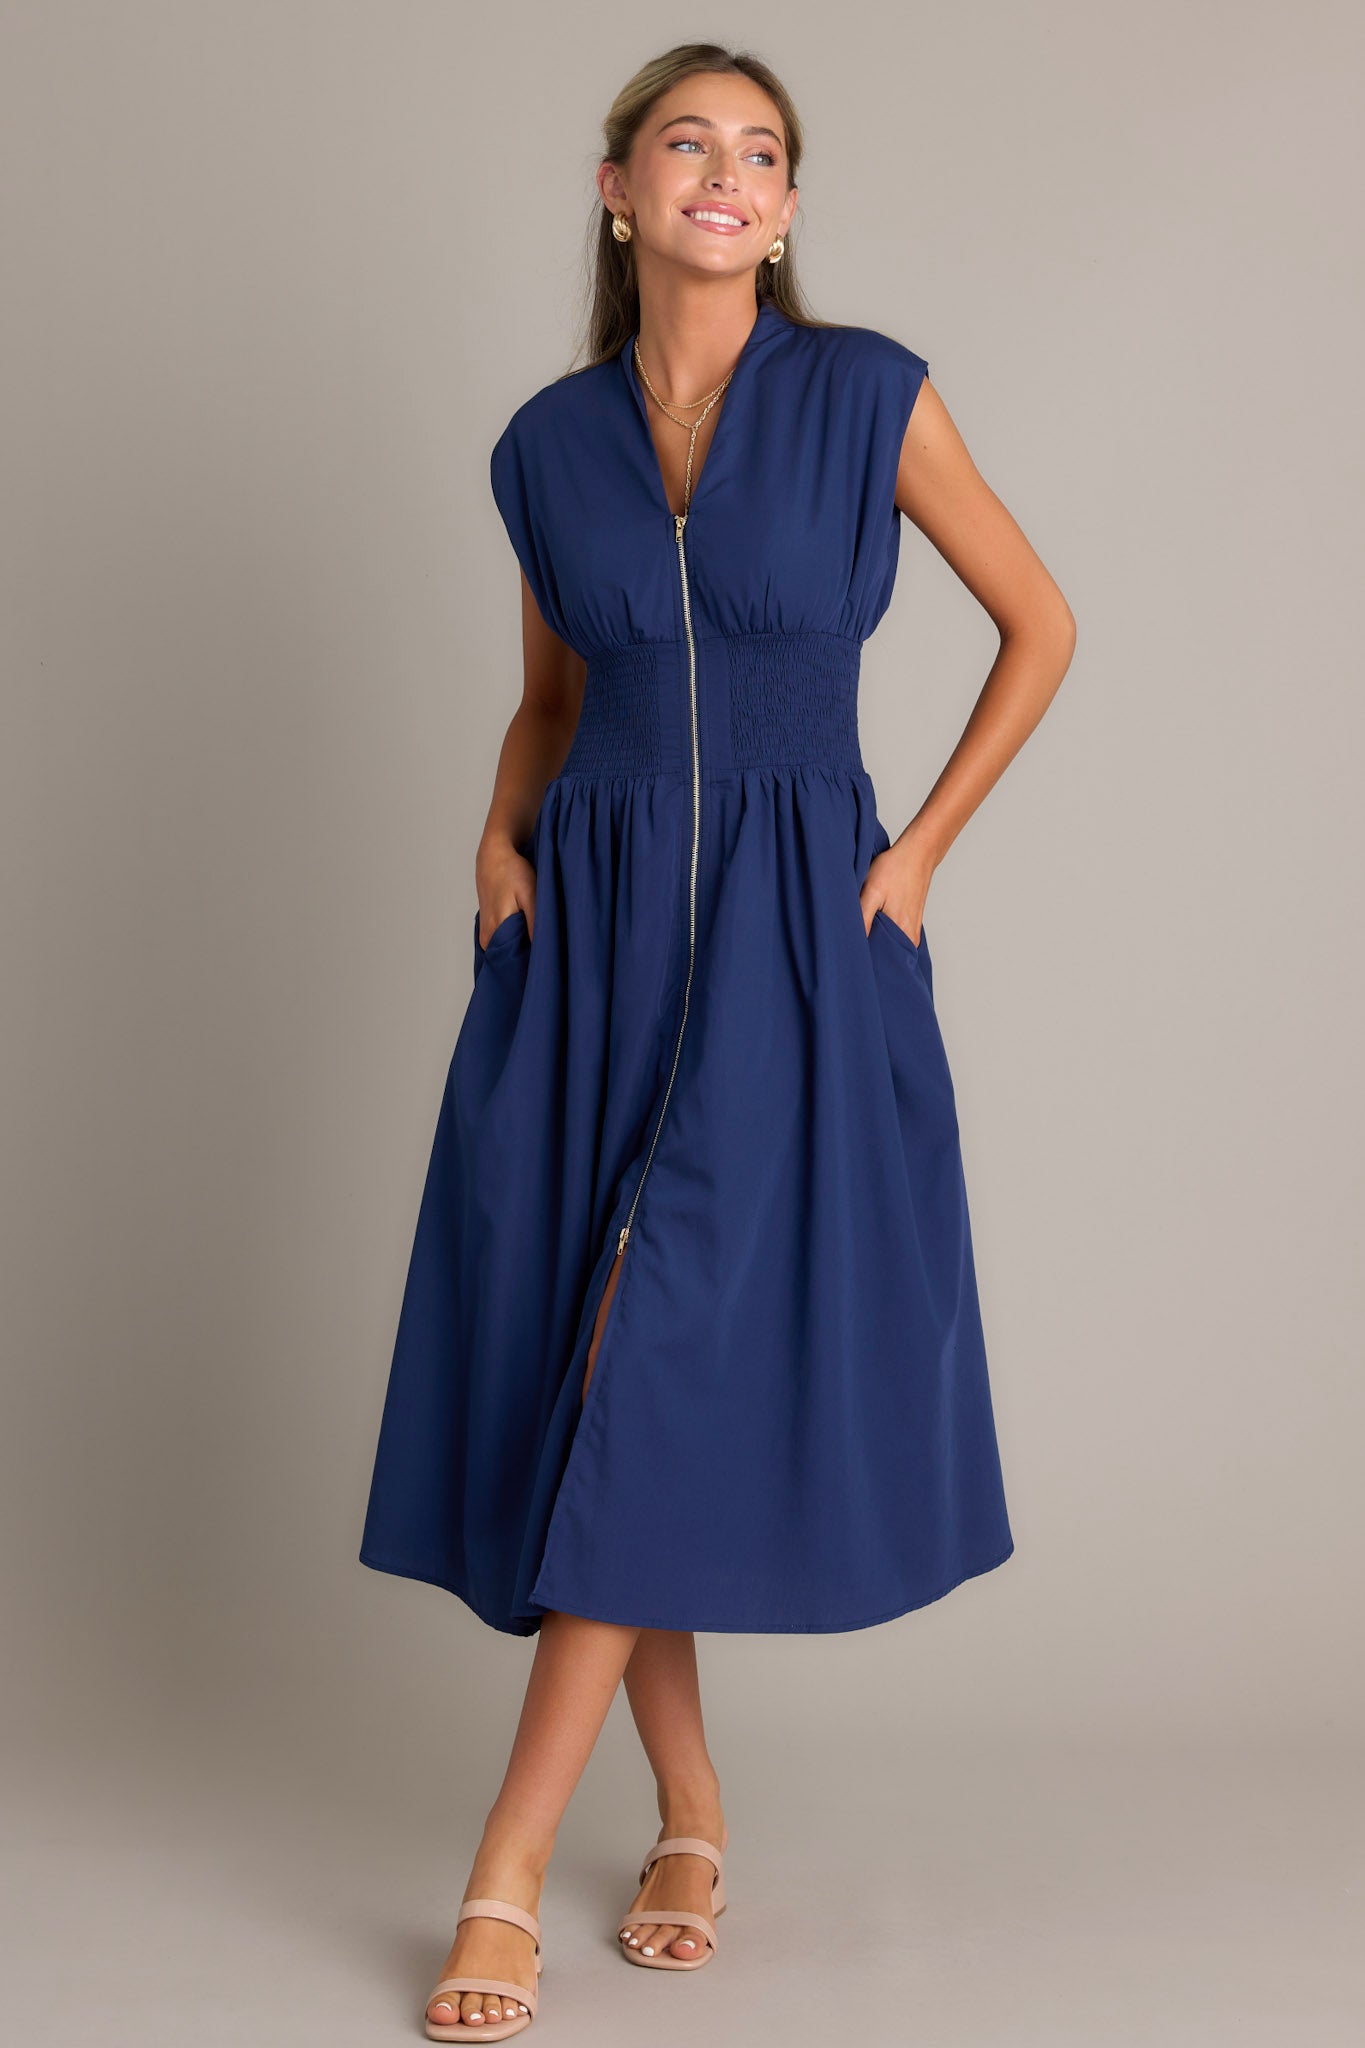 view of a navy blue dress featuring a V-neckline, cap sleeves, a zippered front, and a cinched waist with shirred detailing, highlighting its stylish and elegant design.